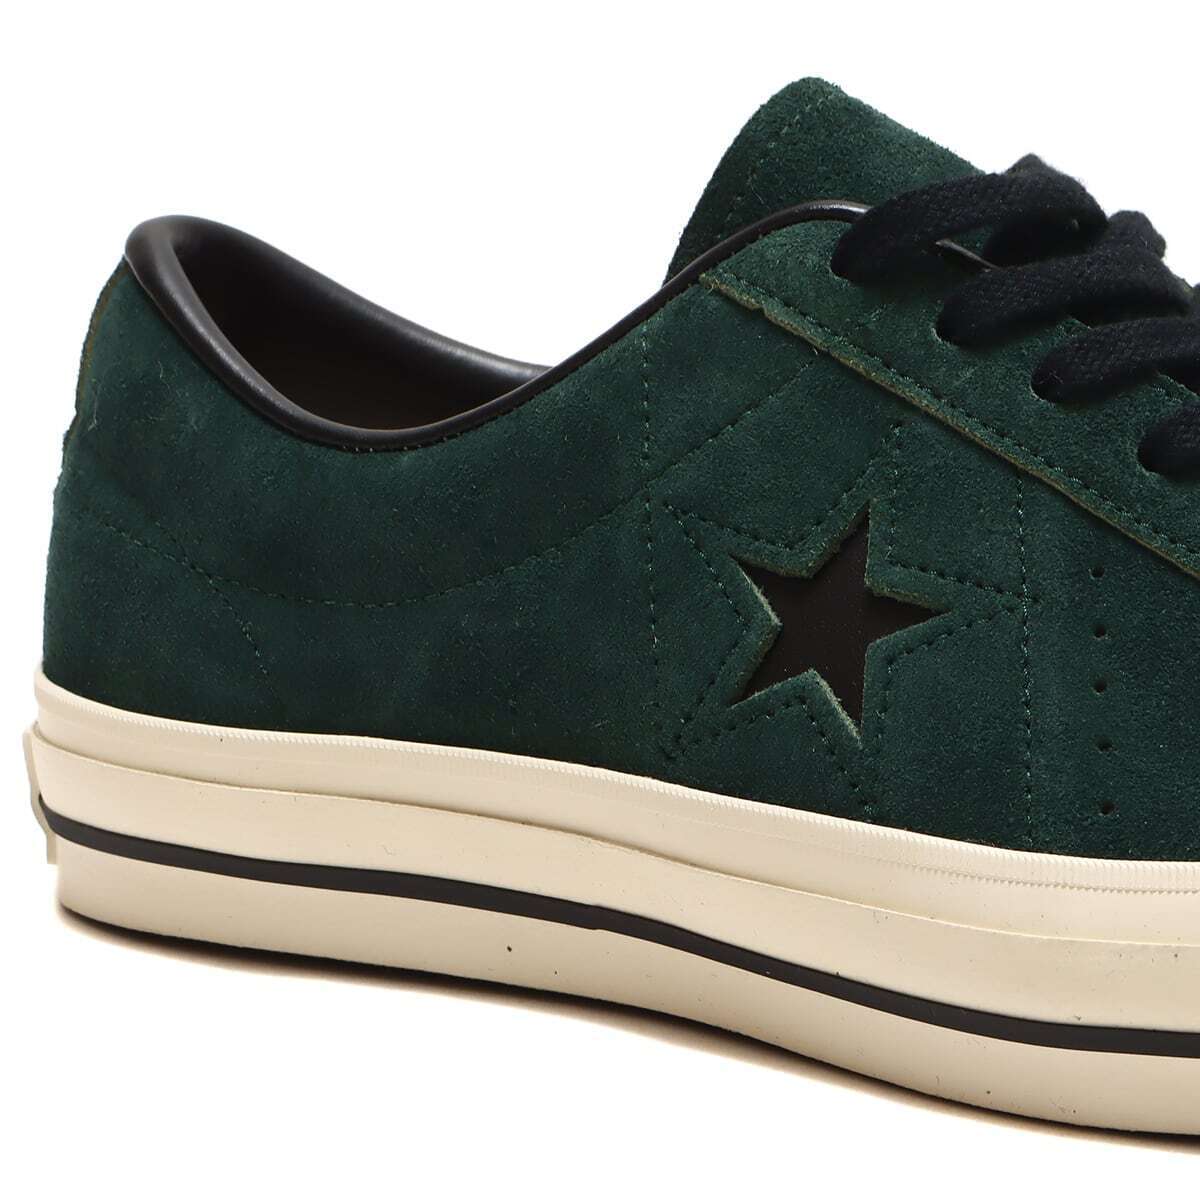 Converse One Star J Suede Color Green Black Made in Japan 35200510 Men Us8.5